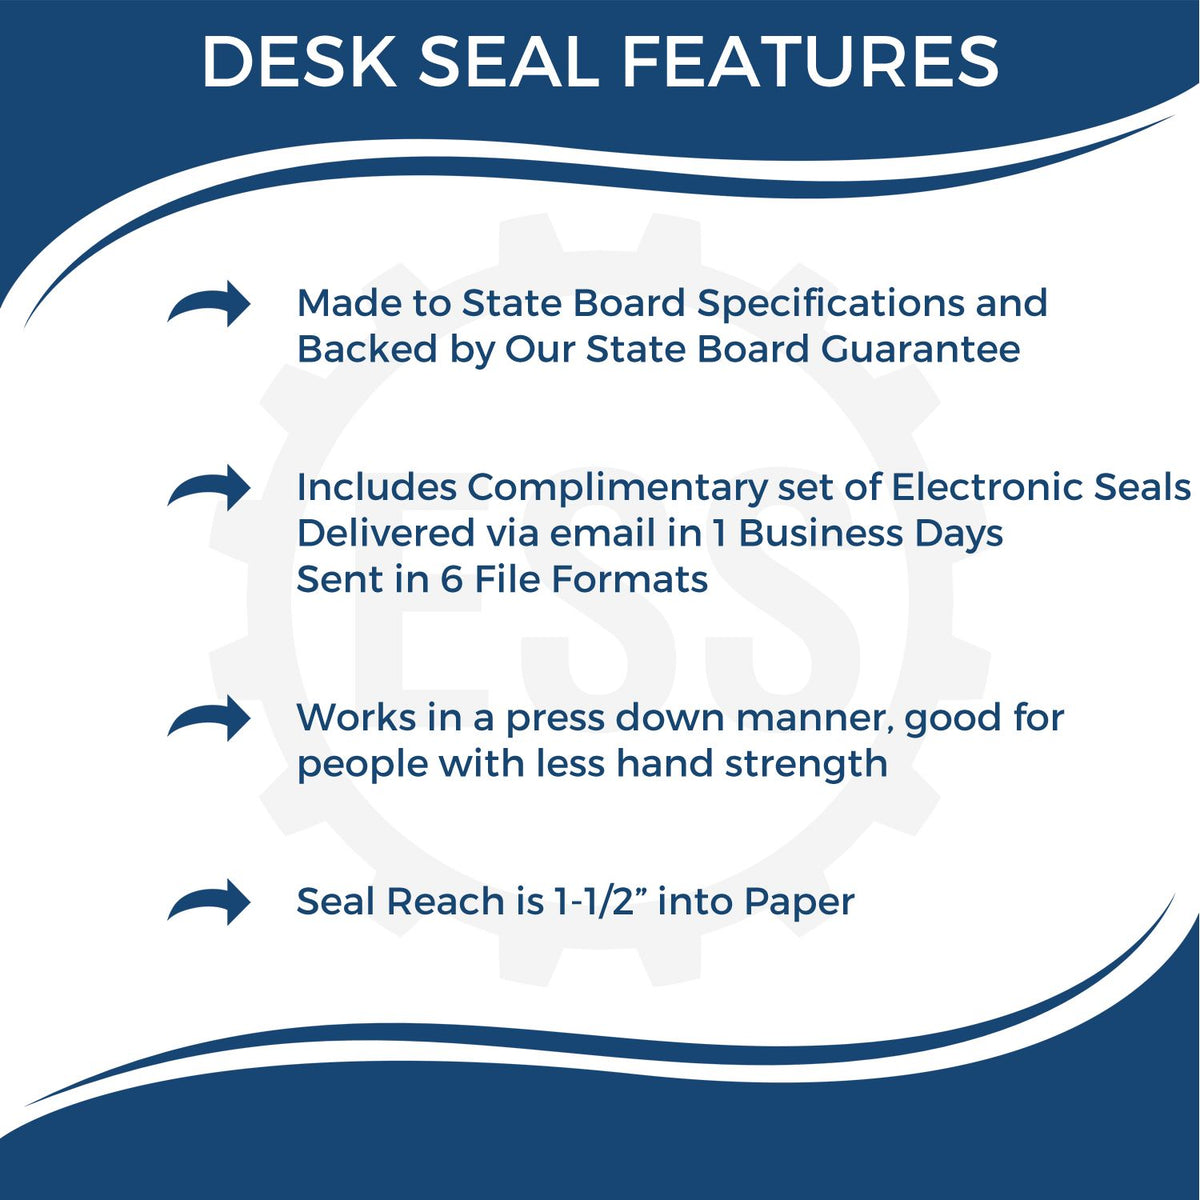 A picture of an infographic highlighting the selling points for the Missouri Desk Architect Embossing Seal